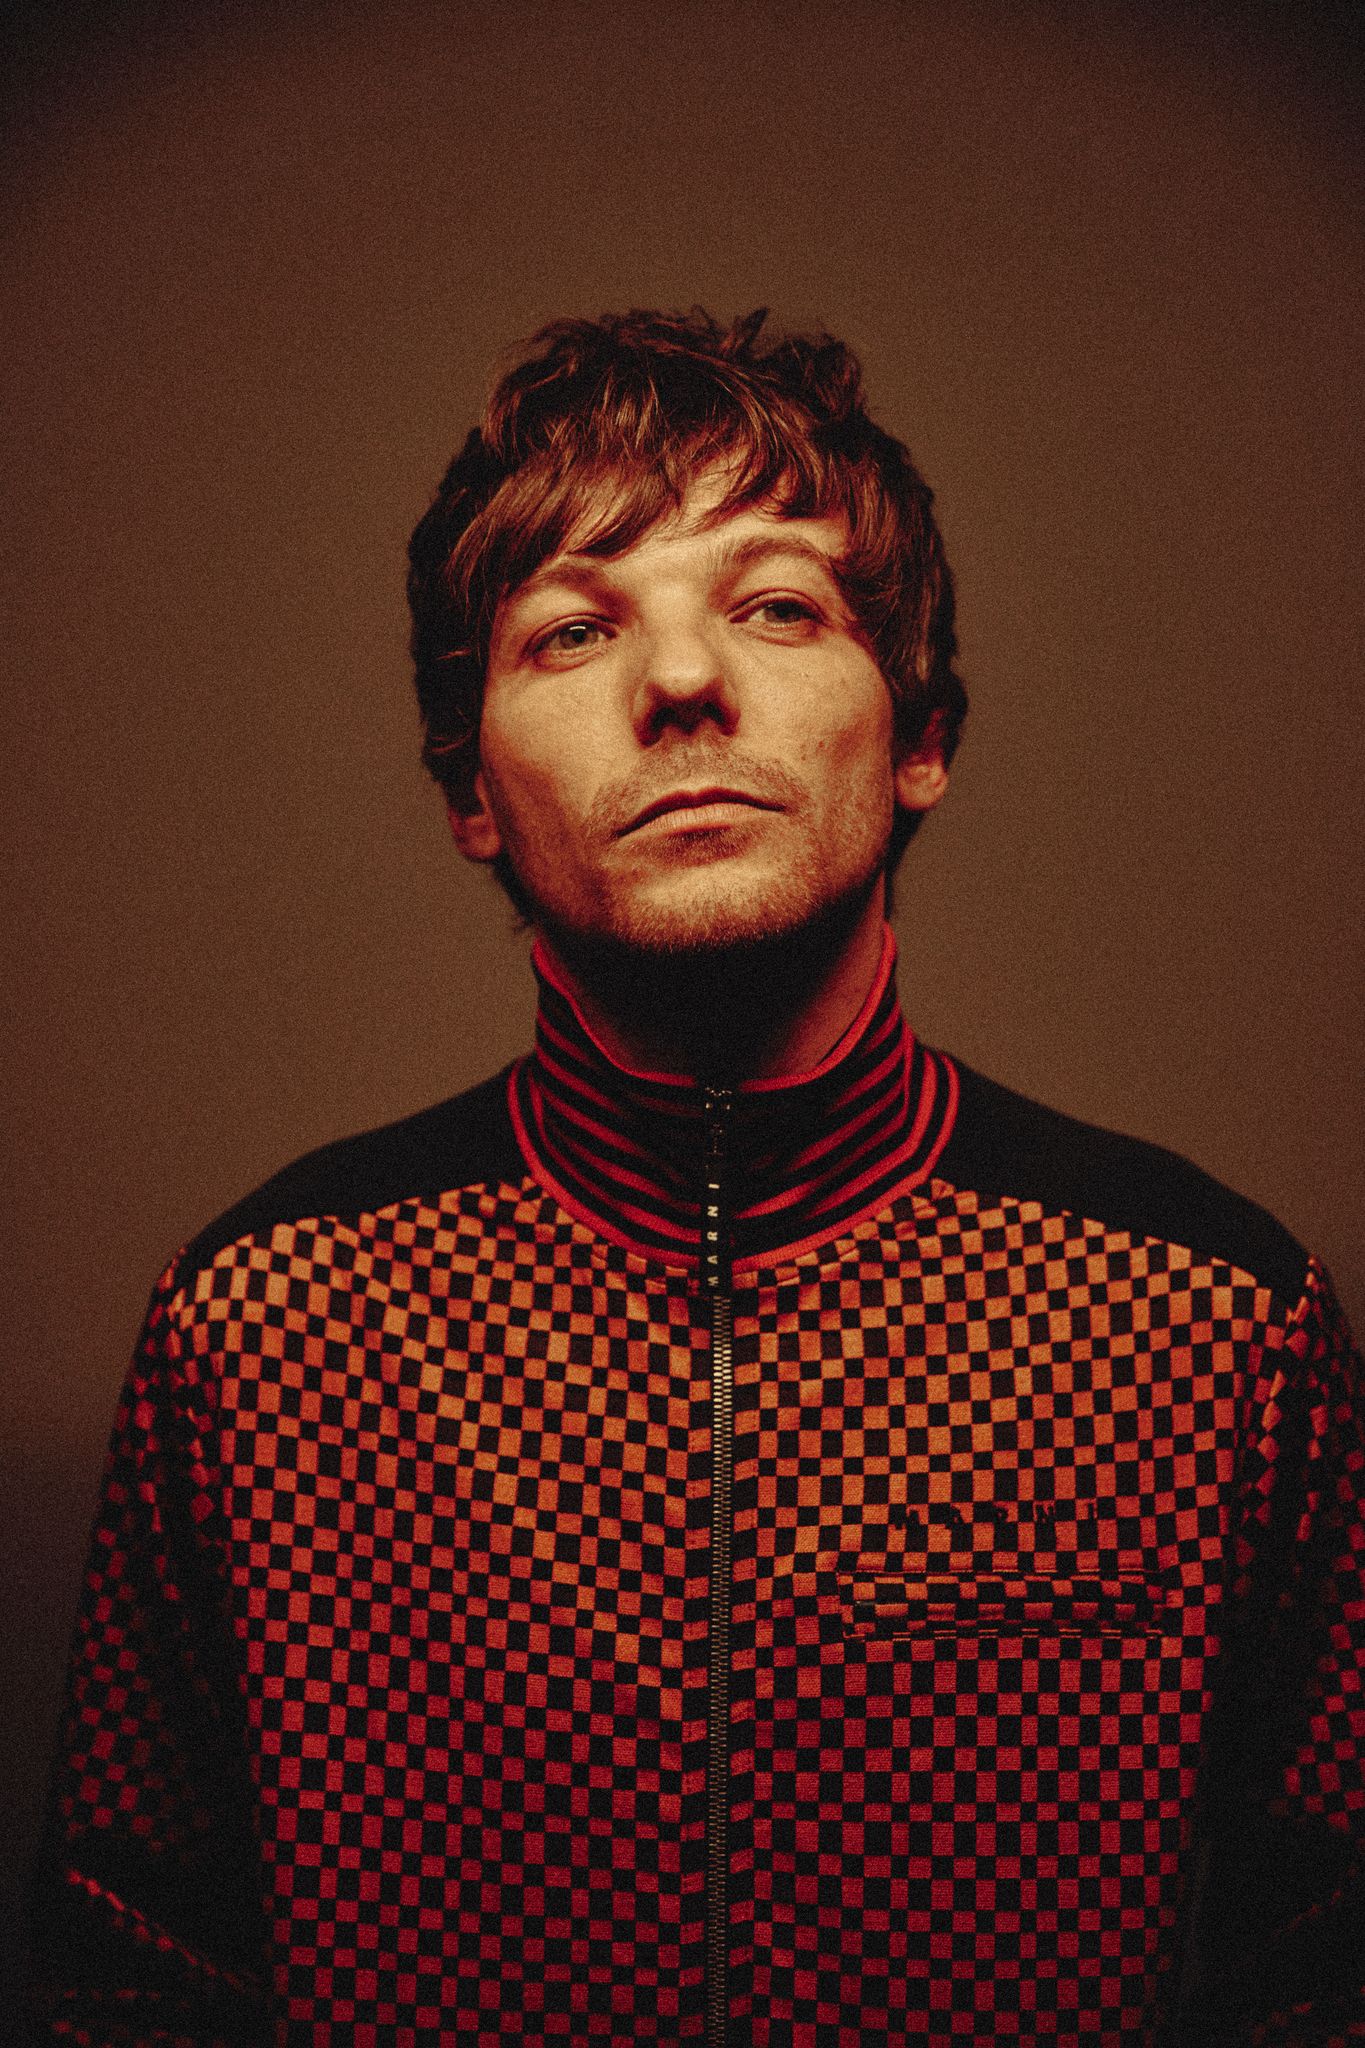 LOUIS TOMLINSON LAUNCHES OPPORTUNITY FOR UP-AND-COMING BANDS TO JOIN HIS “FAITH IN THE FUTURE” AUSSIE TOUR!